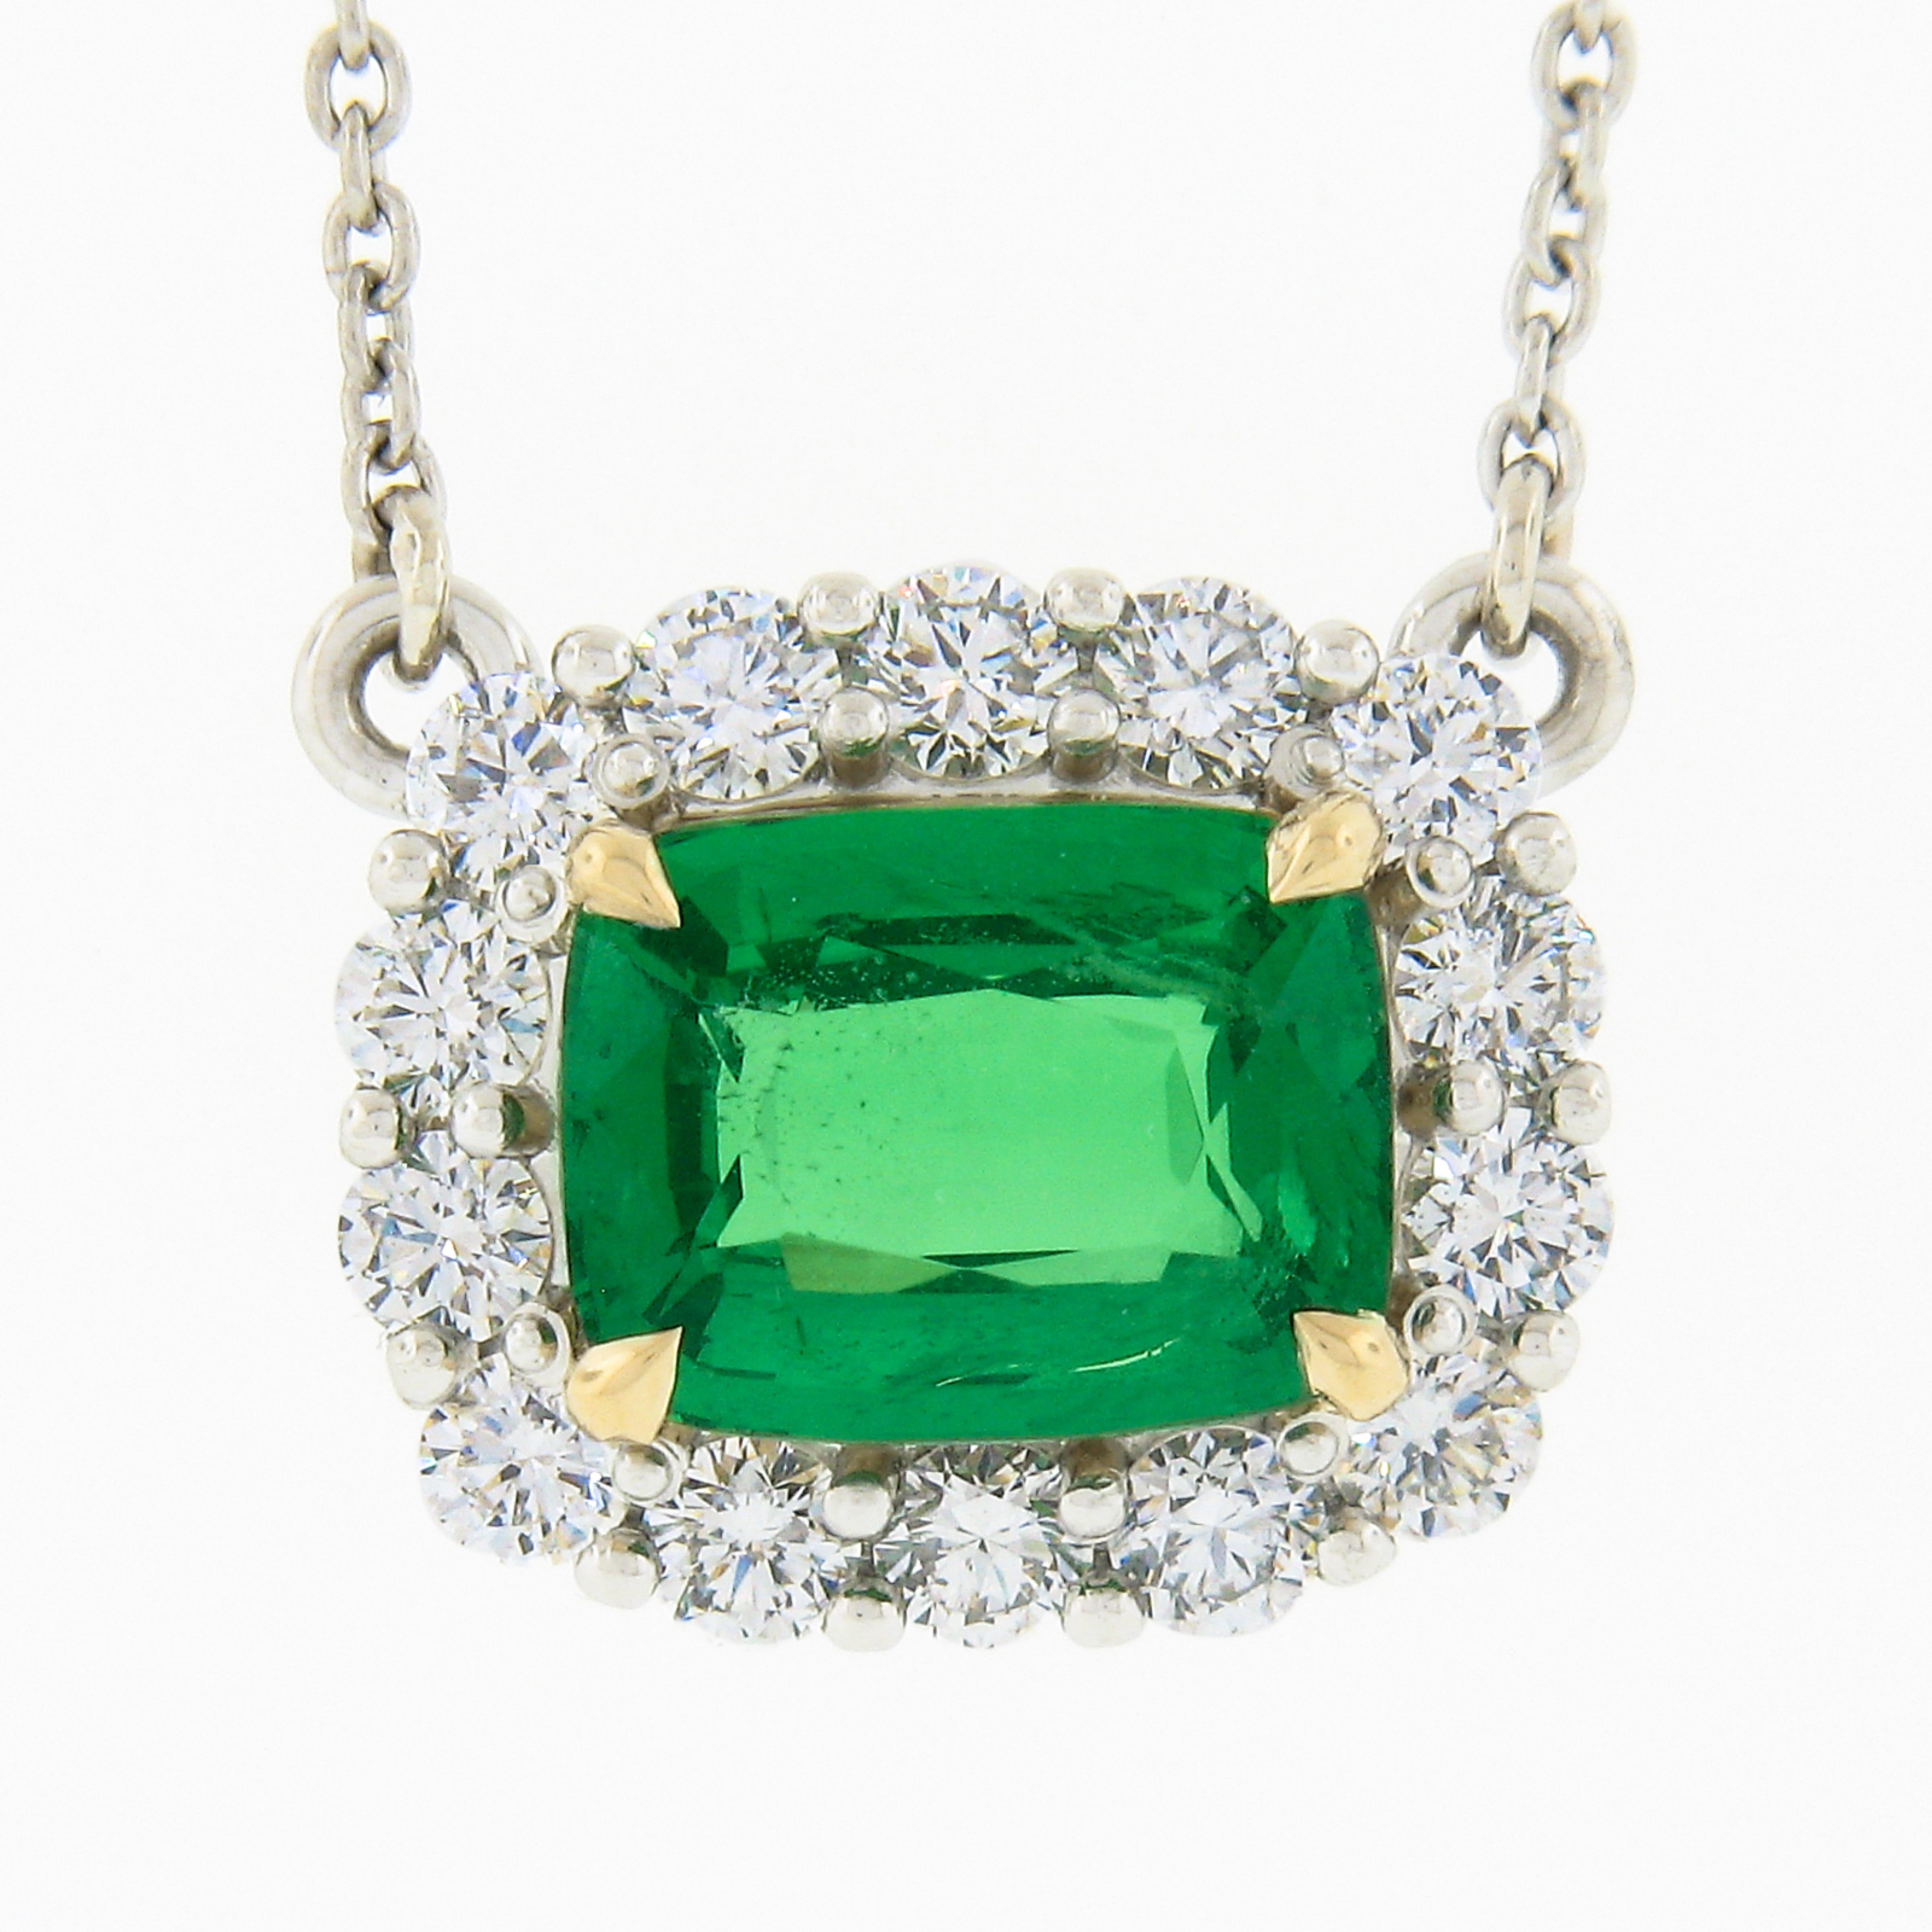 Here we have an absolutely gorgeous pendant necklace that is newly crafted from .950 platinum with a solid 18k yellow gold center basket that carries a stunning, GIA certified, natural tsavorite stone surrounded by a super fiery diamond halo. The